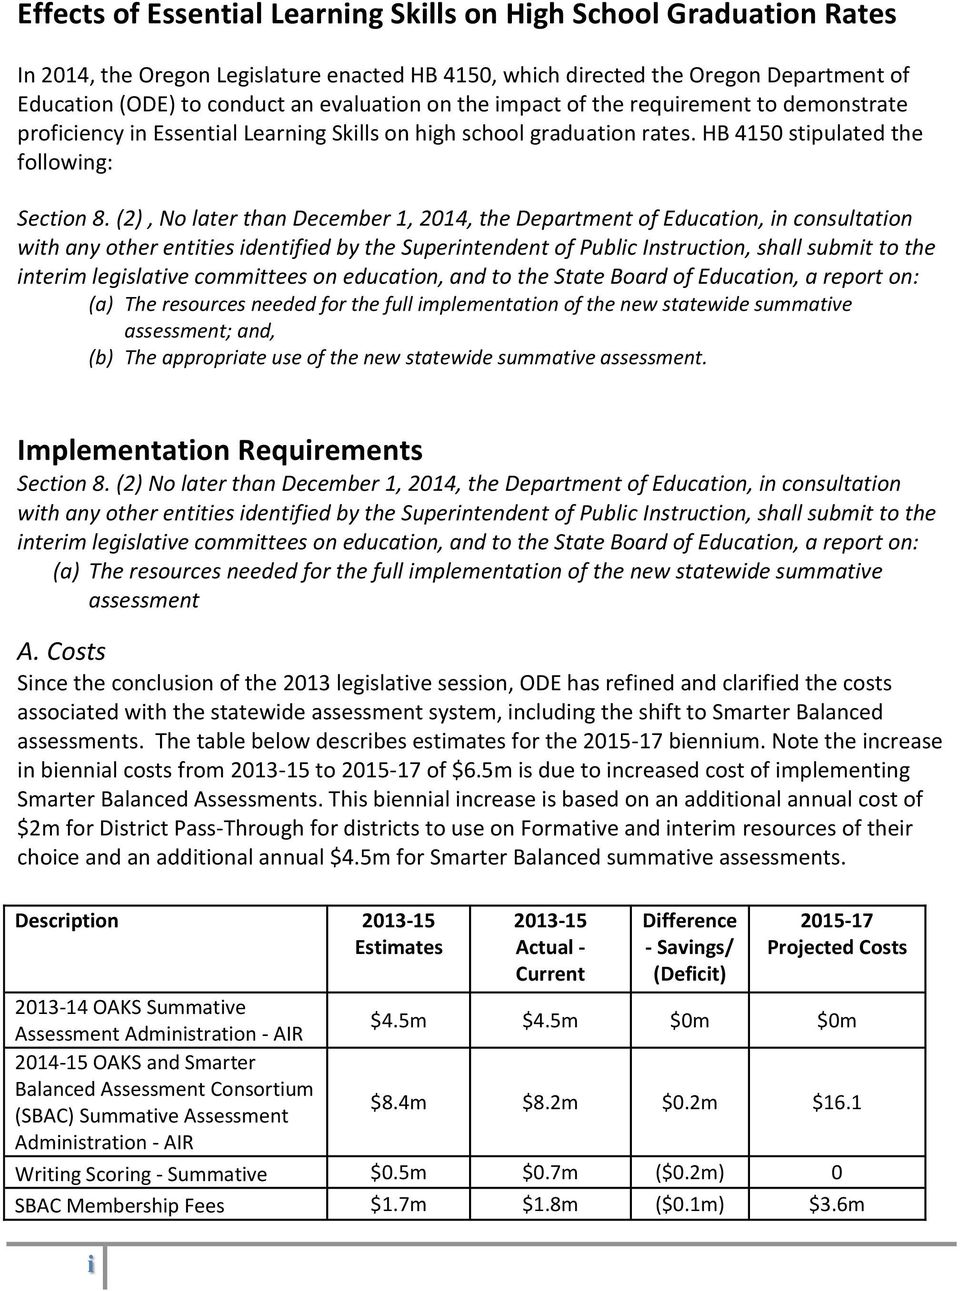 (2), No later than December 1, 2014, the Department of Education, in consultation with any other entities identified by the Superintendent of Public Instruction, shall submit to the interim